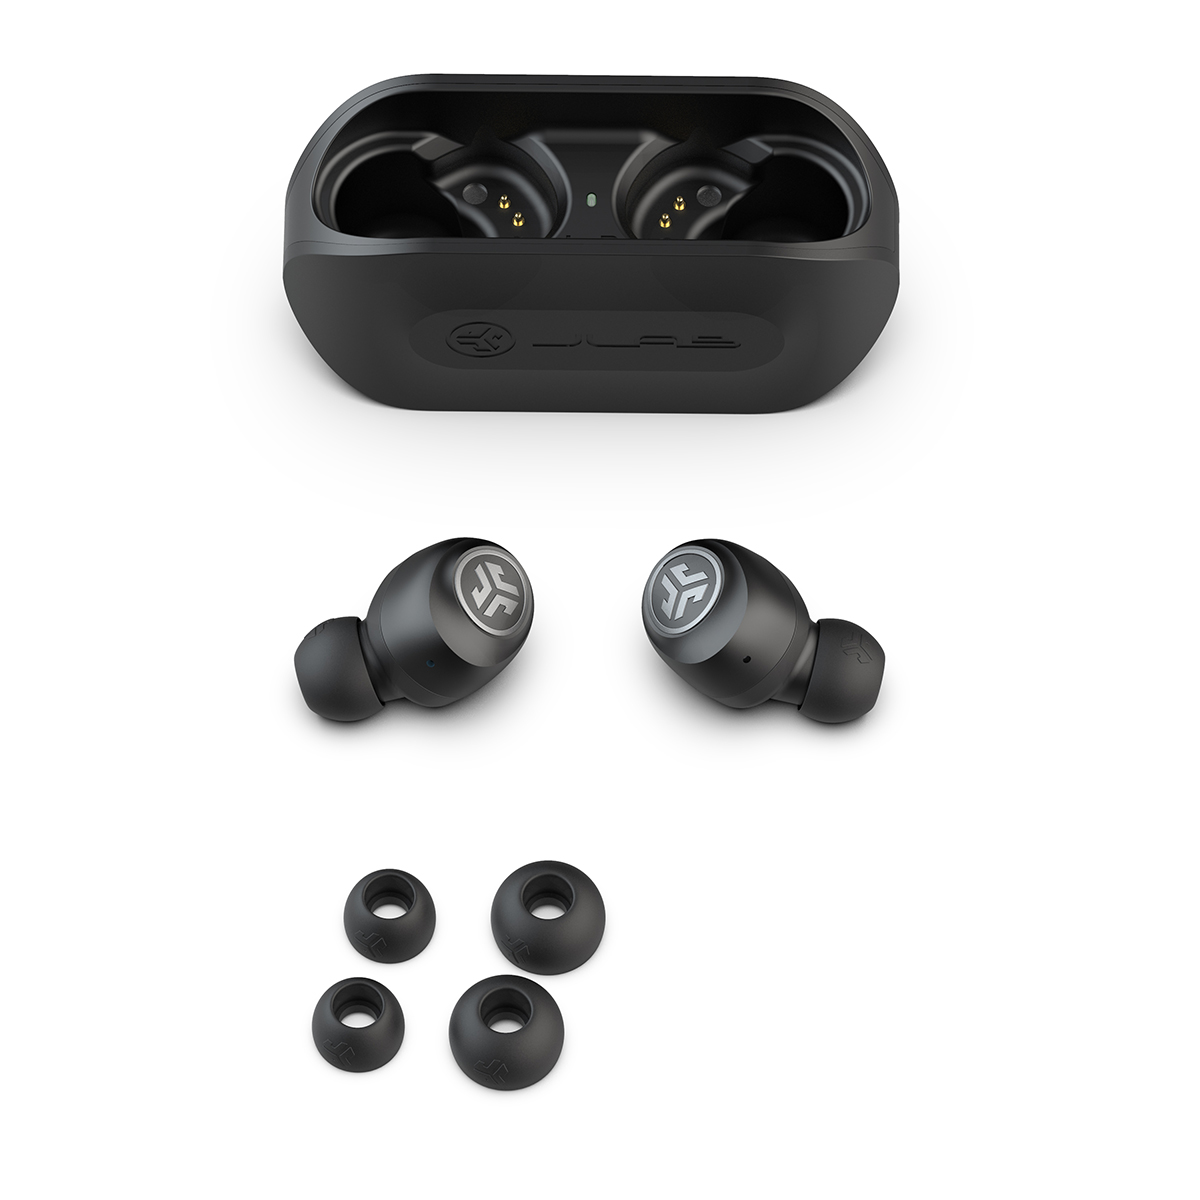 GO Air True Wireless Earbuds - Black - image 1 of 3